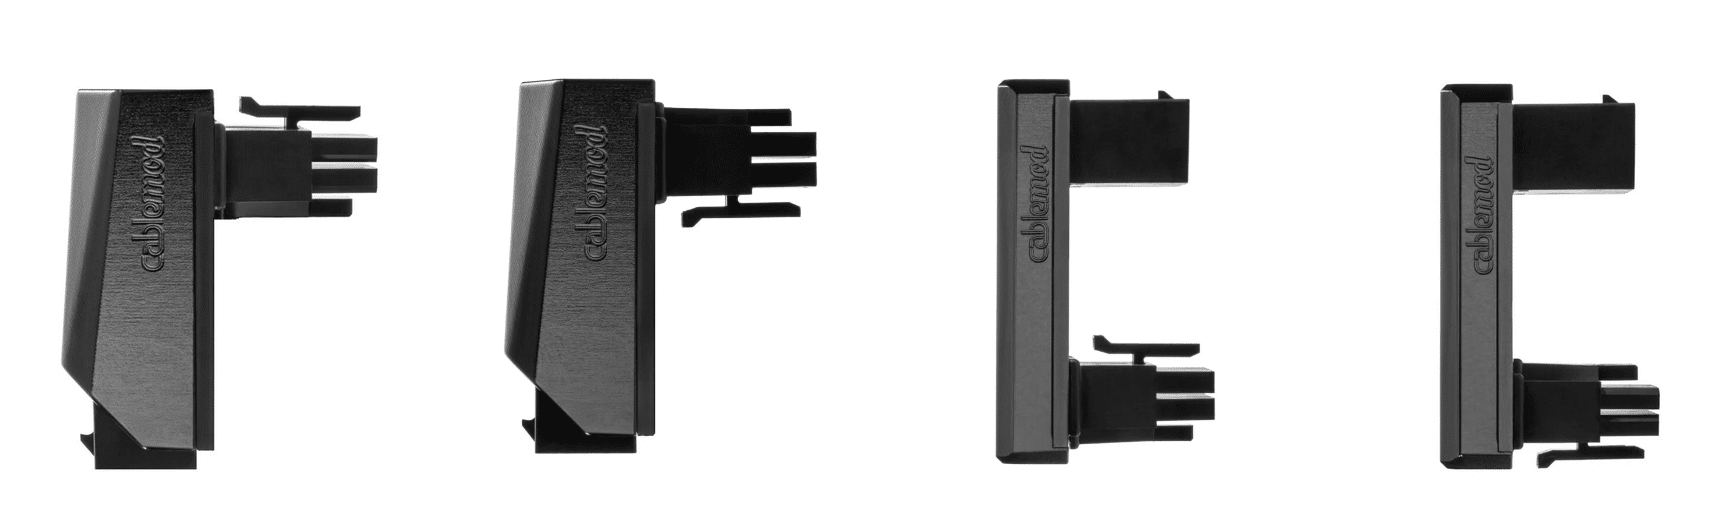 CableMod Recalls Angled Adapters After $75,000 in Damage